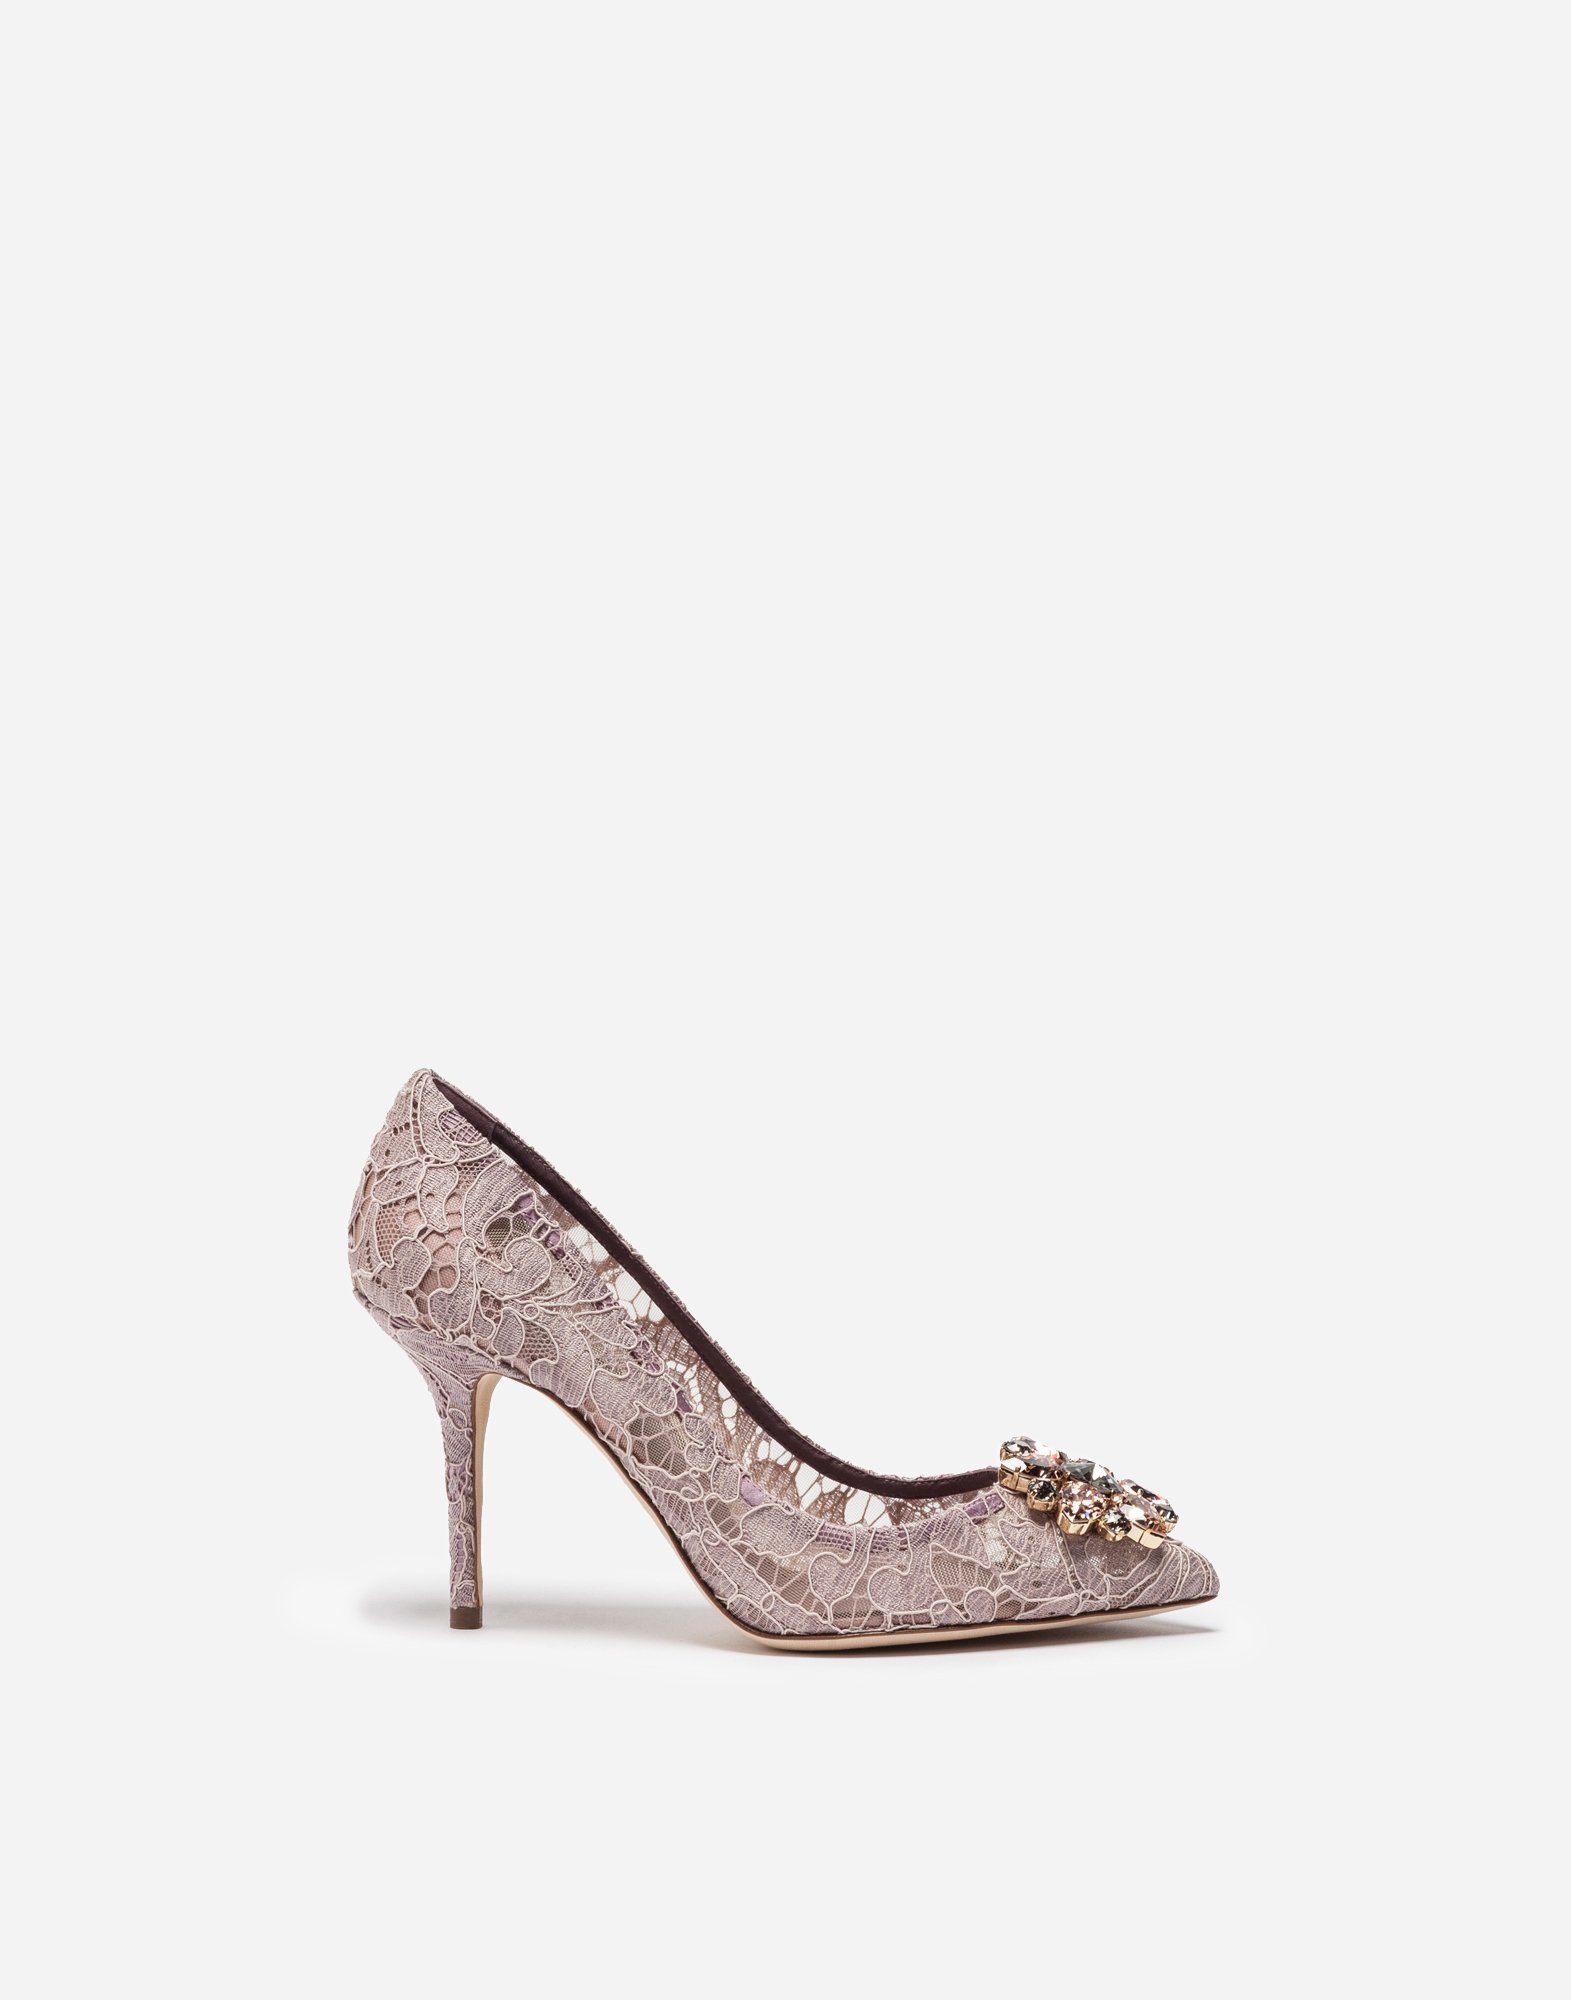 Lace rainbow pumps with brooch detailing in Blush